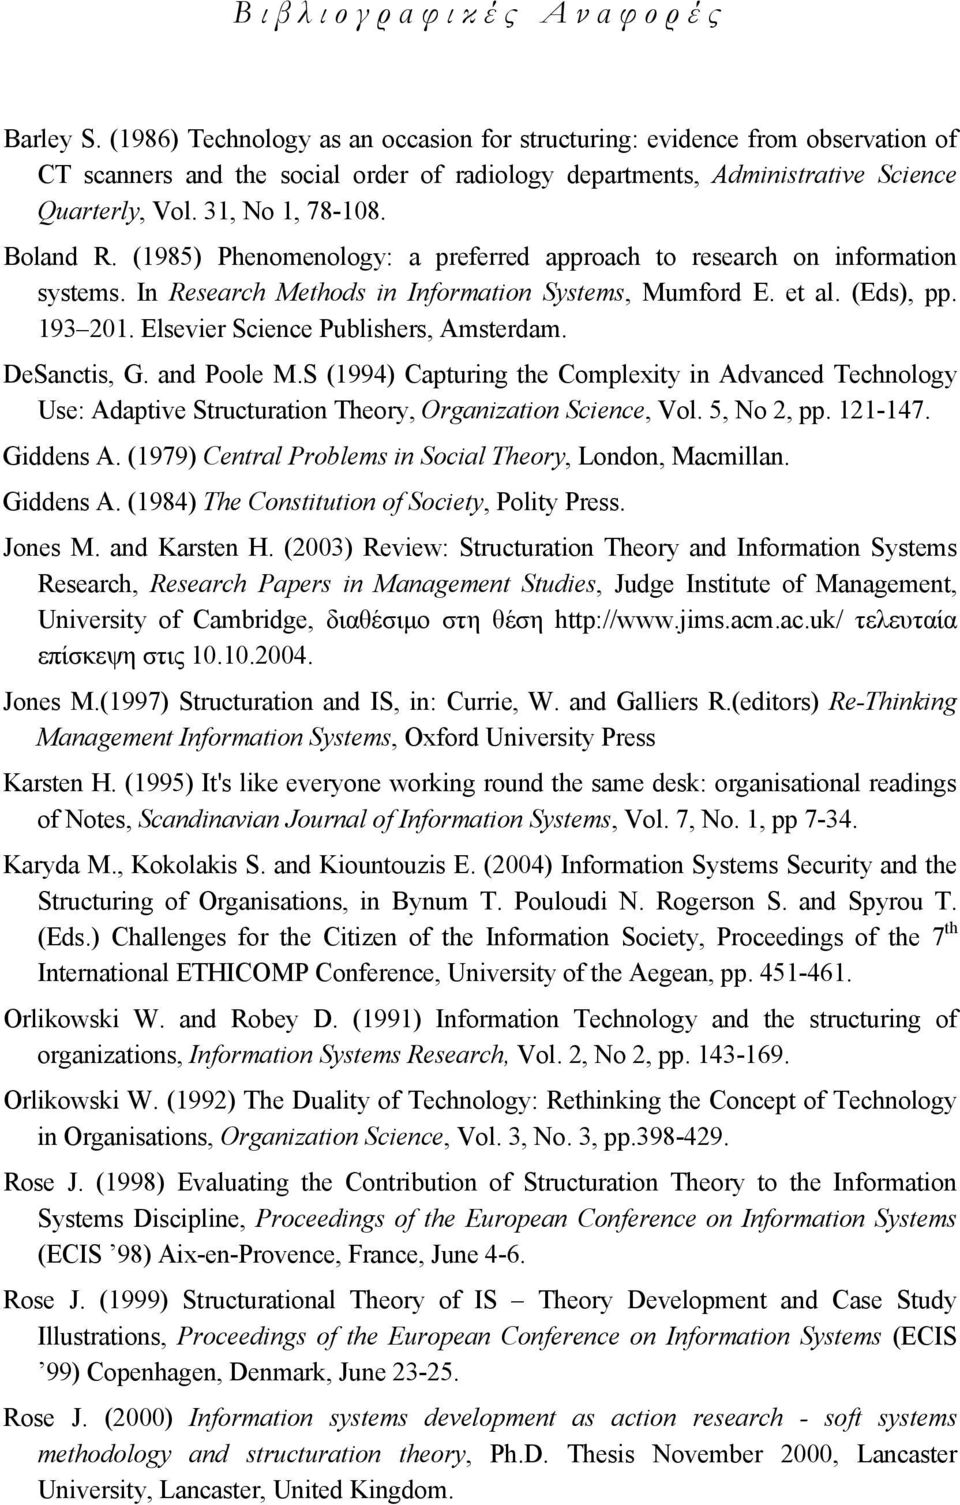 Boland R. (1985) Phenomenology: a preferred approach to research on information systems. In Research Methods in Information Systems, Mumford E. et al. (Eds), pp. 193 201.